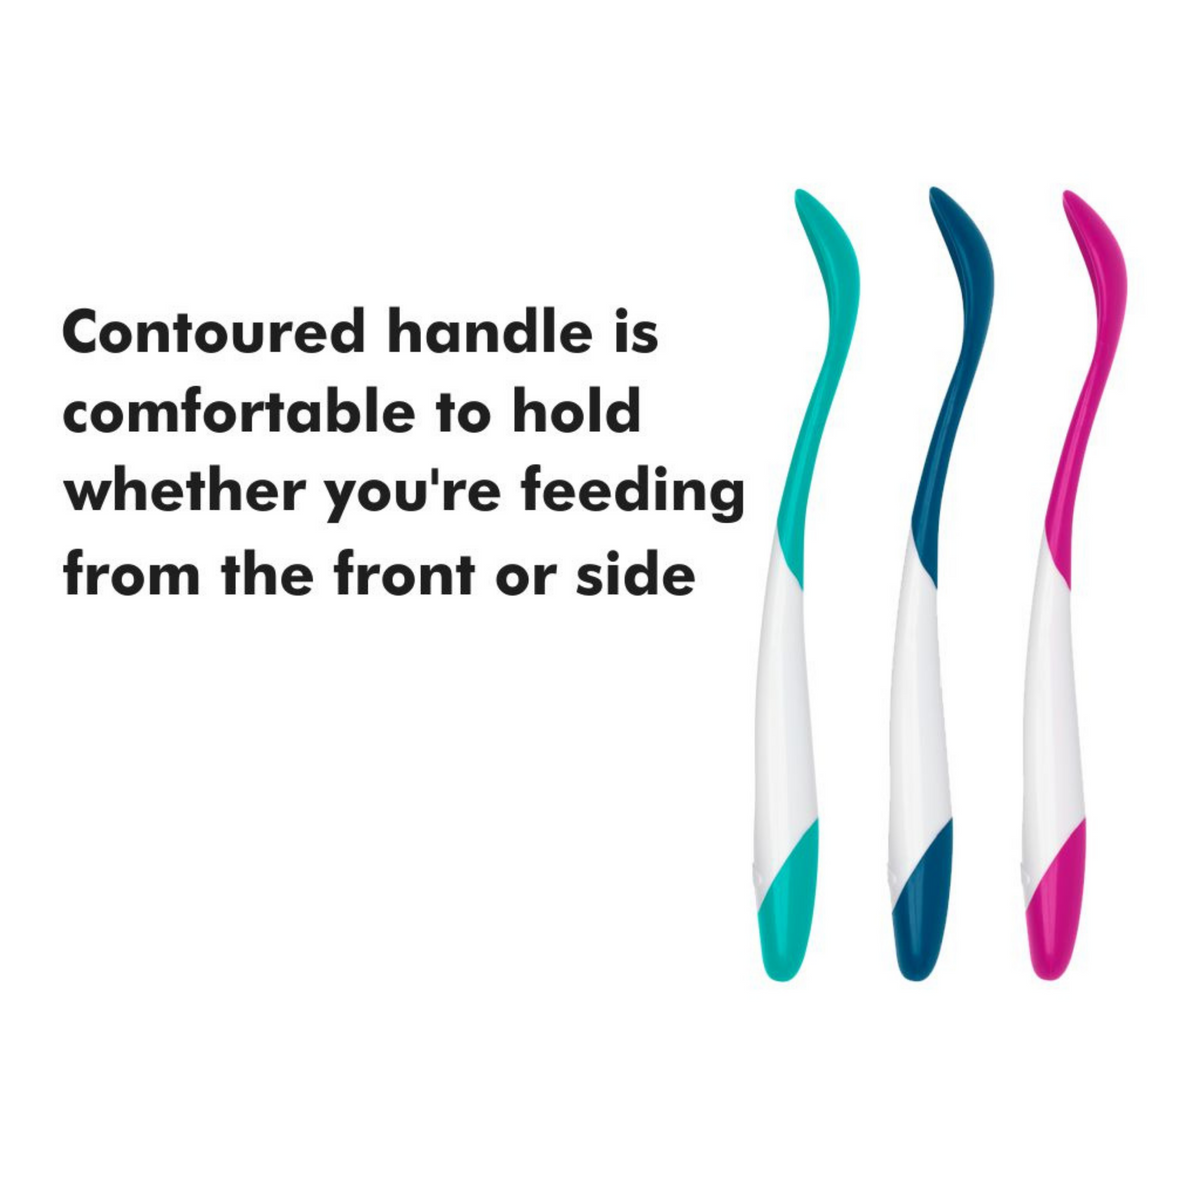 OXO Tot Infant Feeding Spoon, Multipack , 4 Count (Pack of 1)